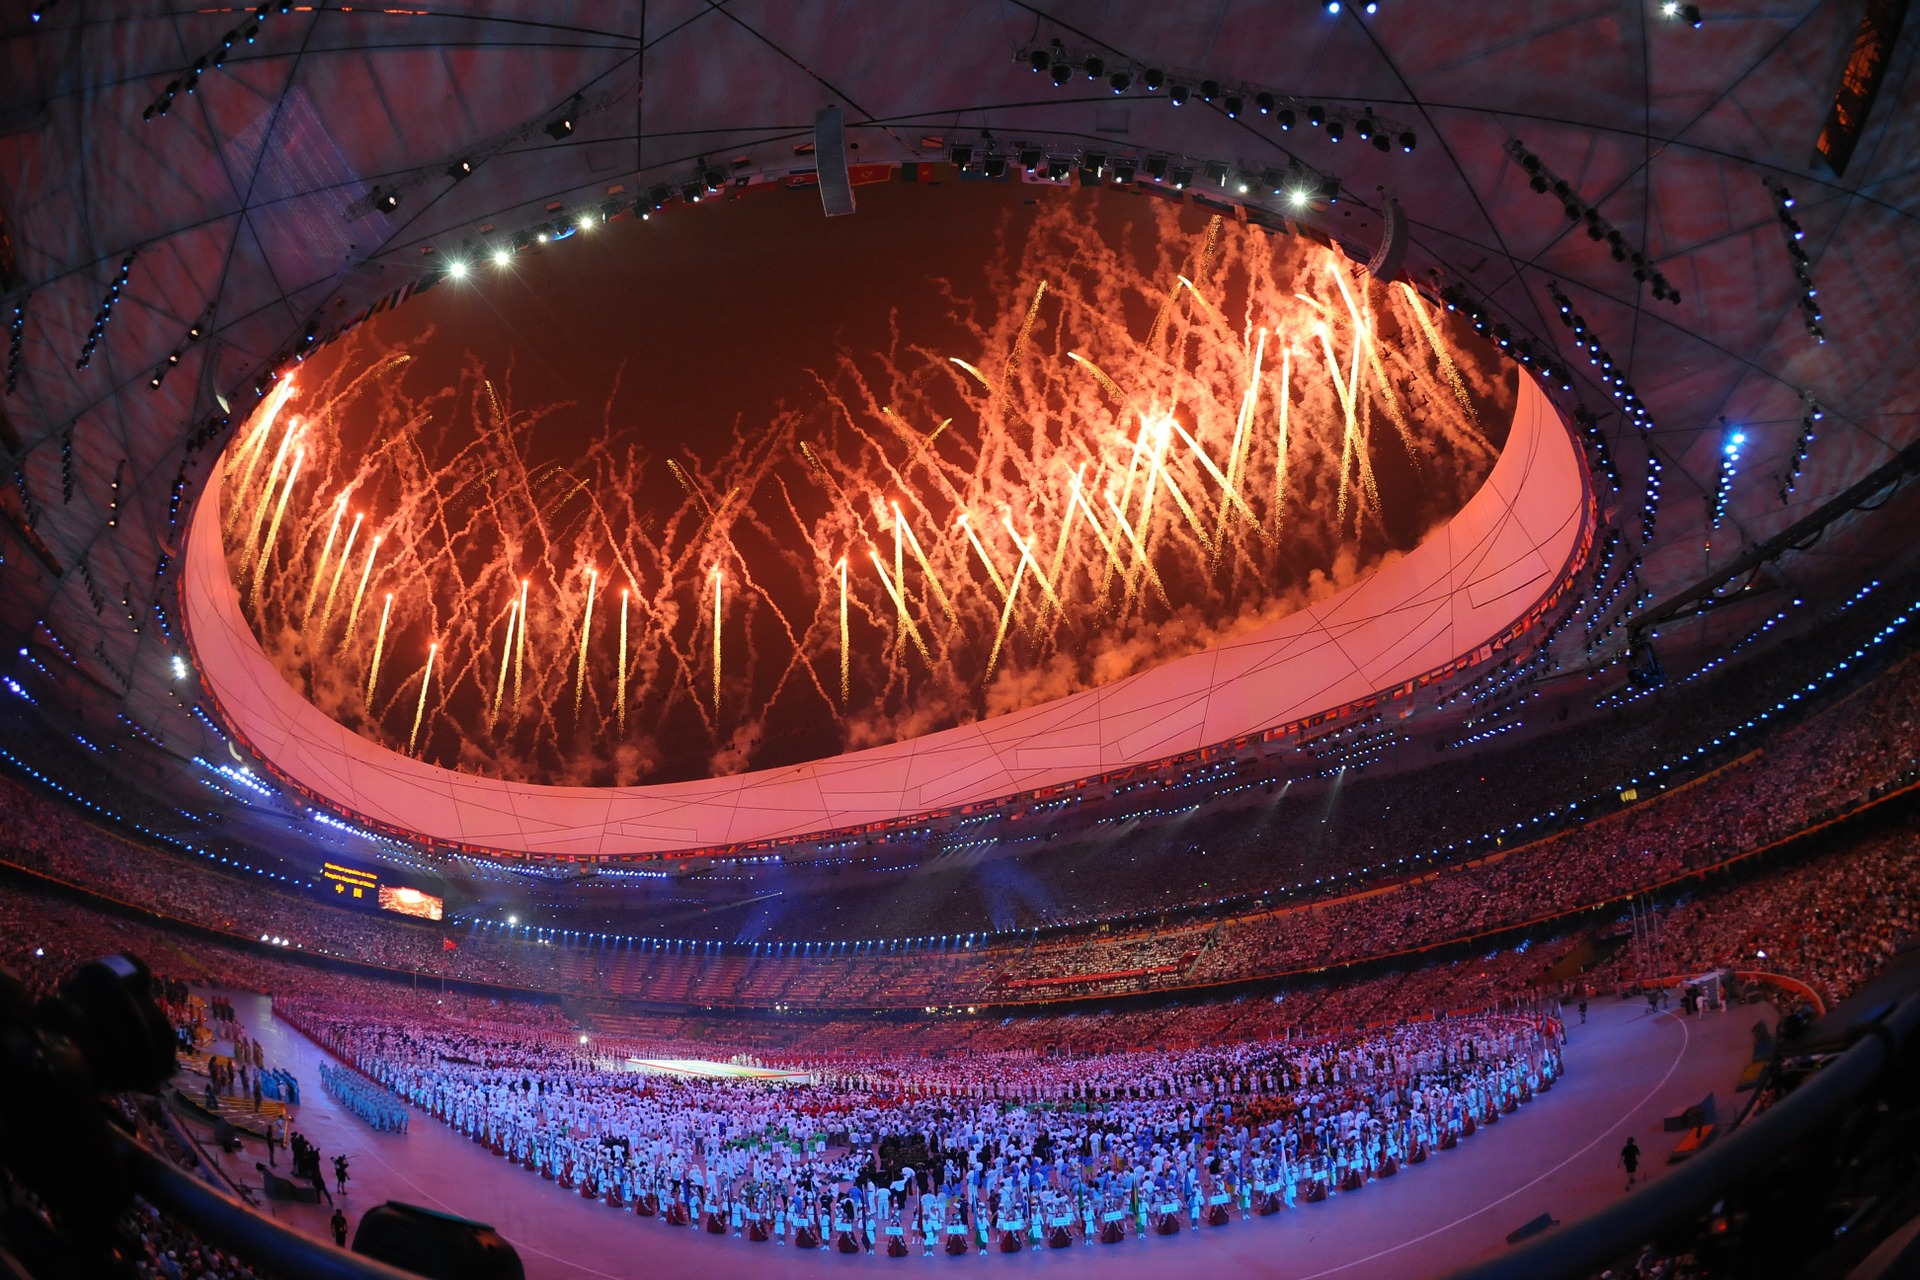 CEIAS CONSIDERS: Will the Beijing Winter Olympics Improve China’s Image?